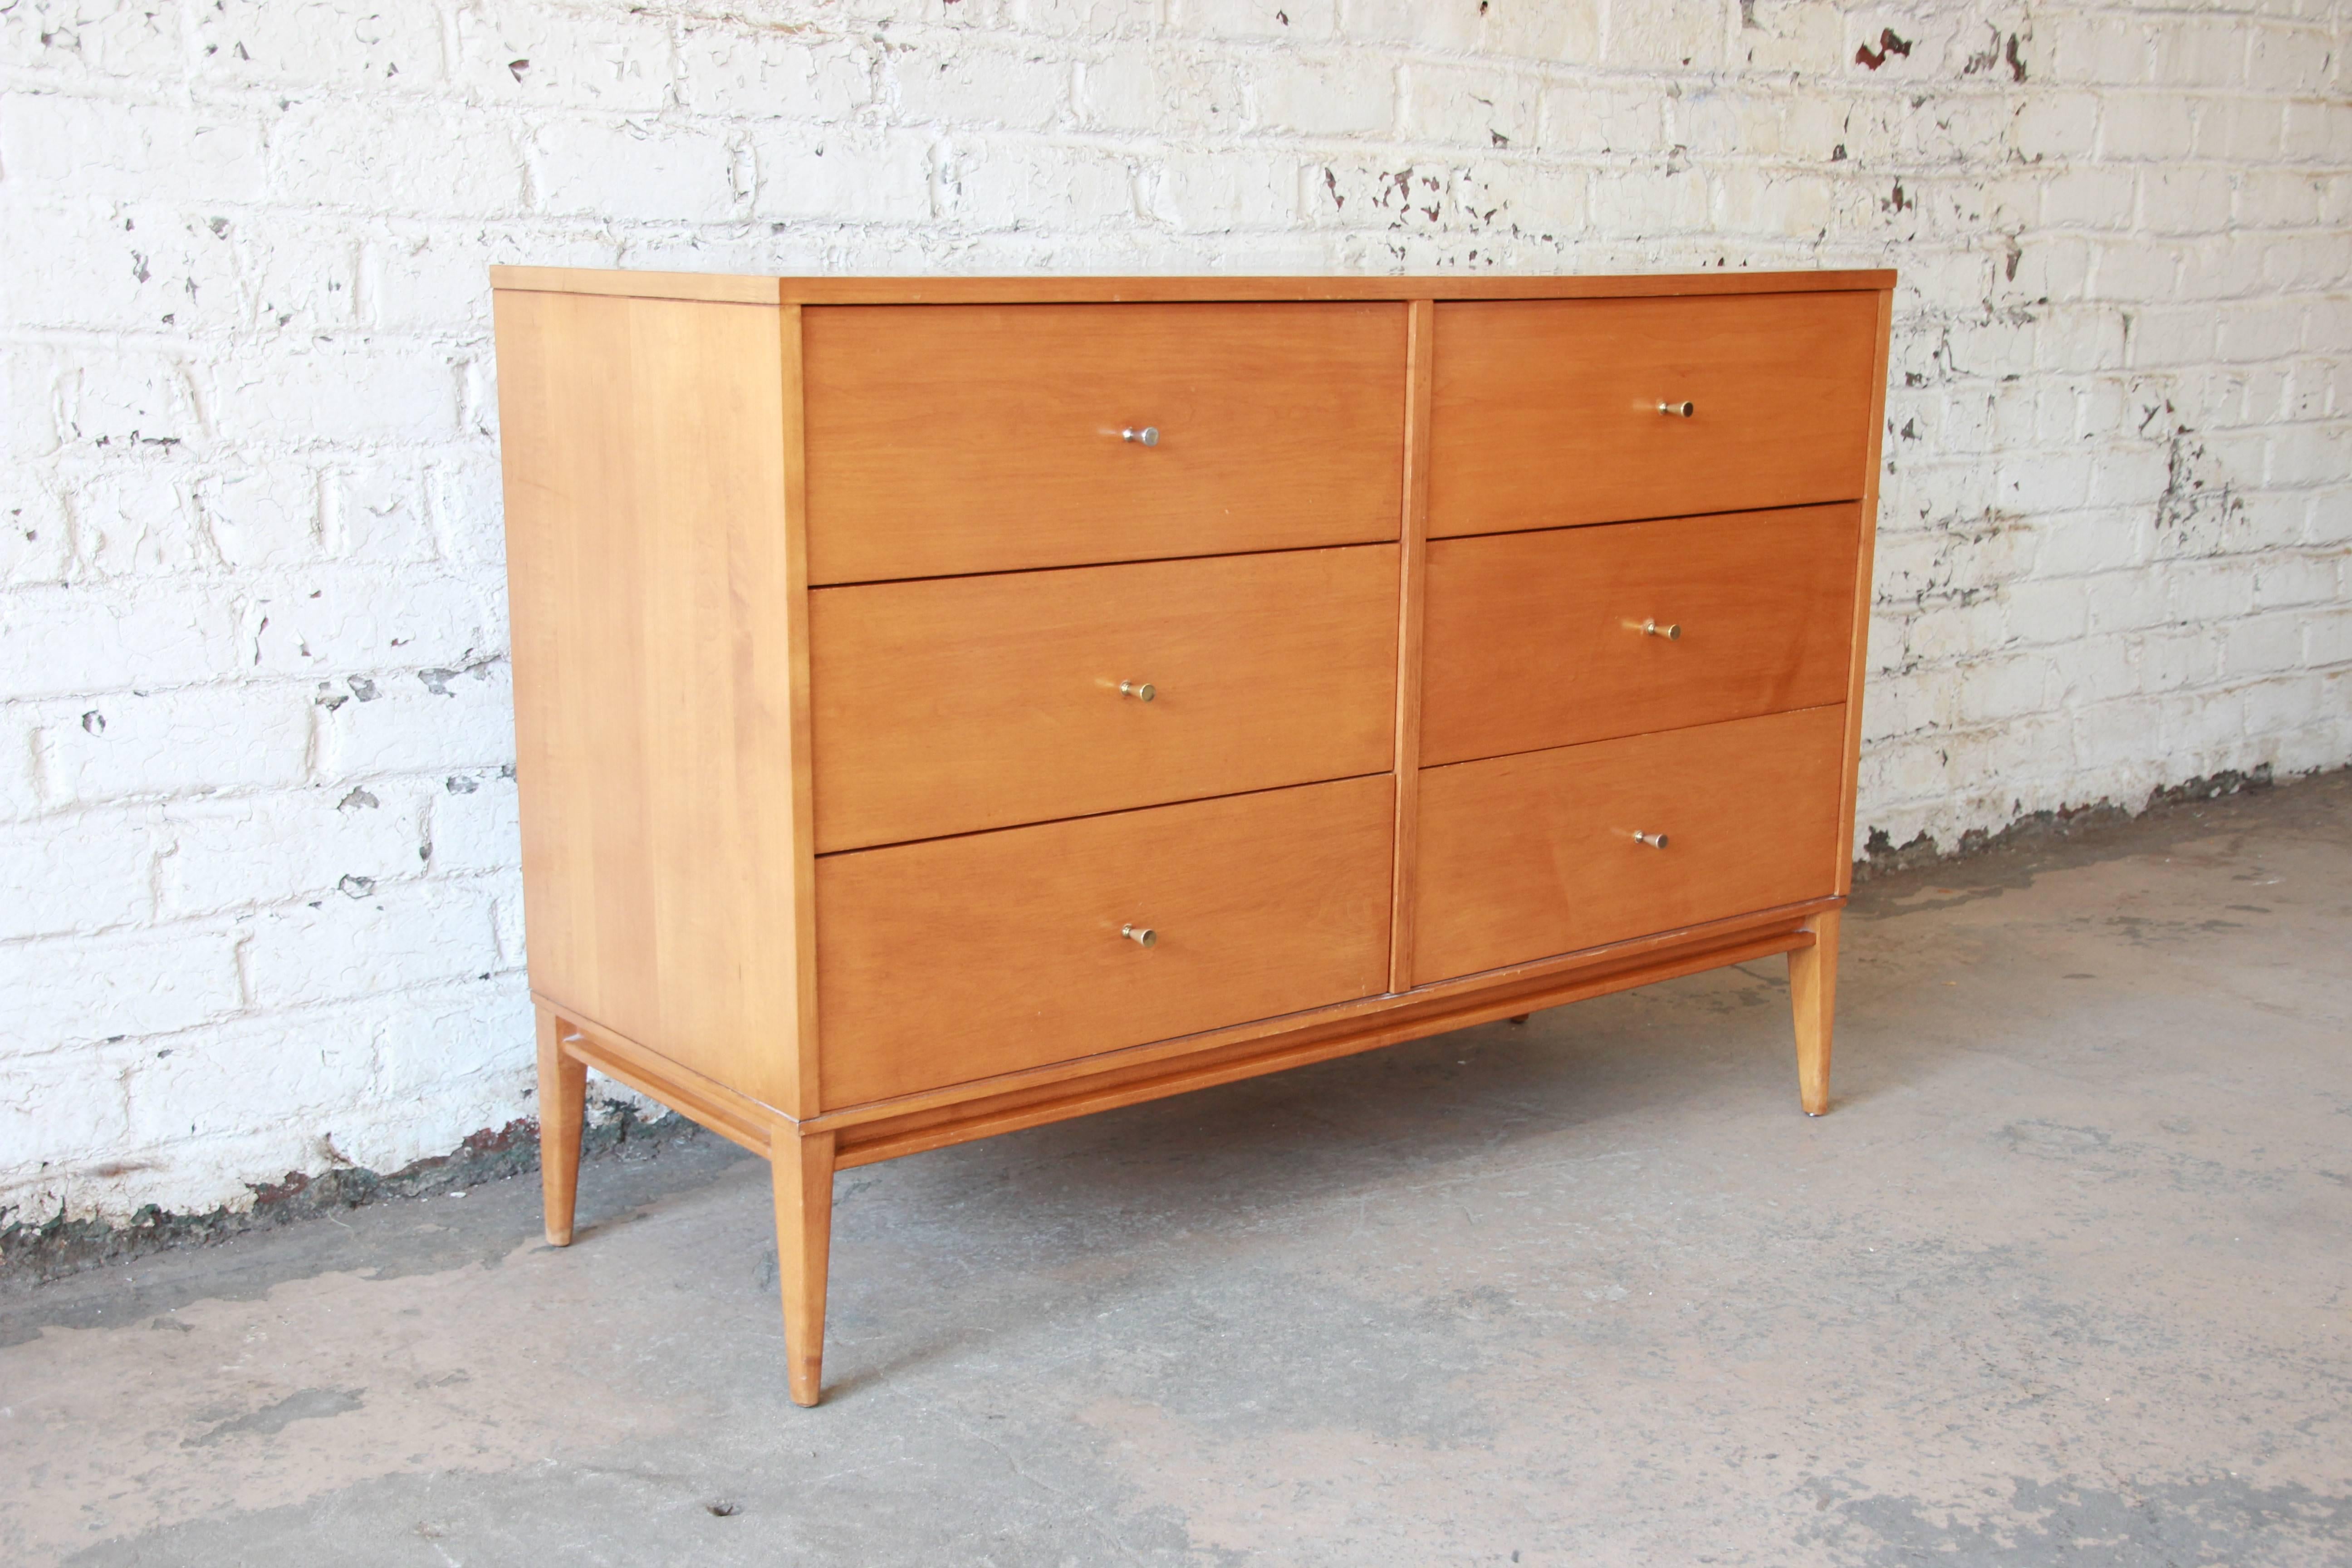 Offering a beautiful original Paul McCobb six-drawer dresser. The dresser is in great original condition with brass pulls. The drawers open and close smoothly and is made from solid birch. This iconic dresser was designed by Paul McCobb for